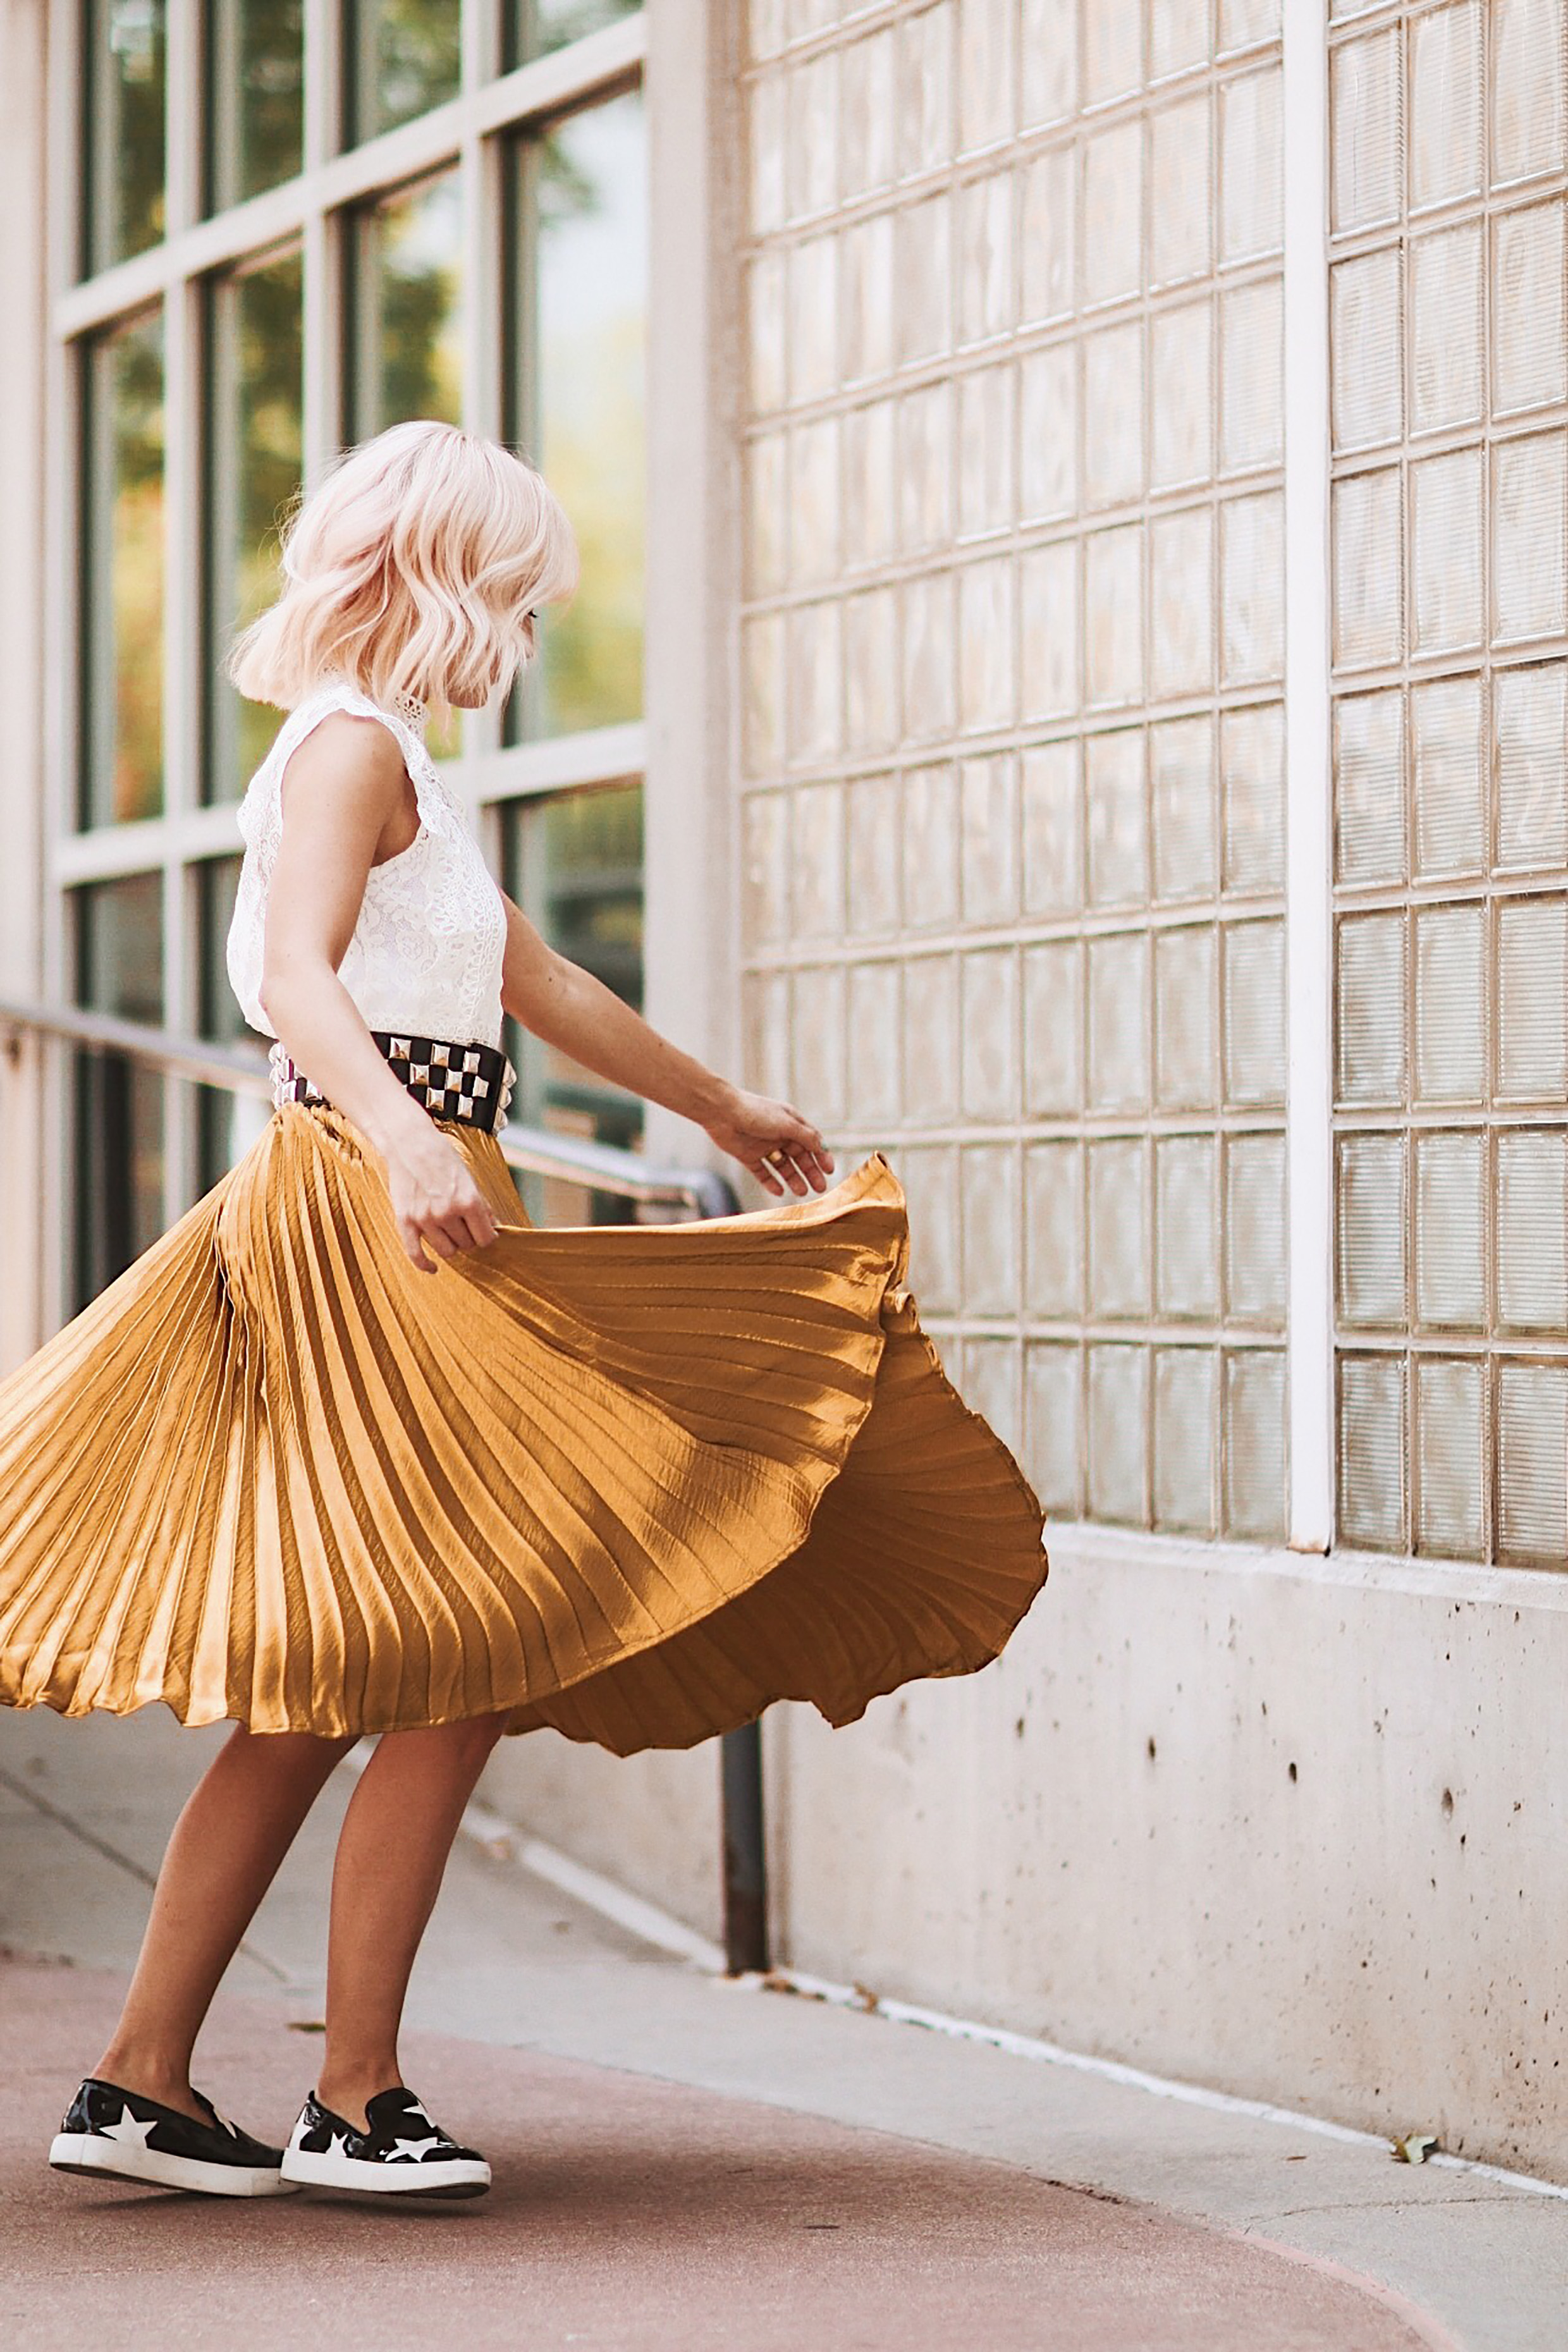 Alena Gidenko of modaprints.com styles a gold pleated skirt with a lace top for Fall